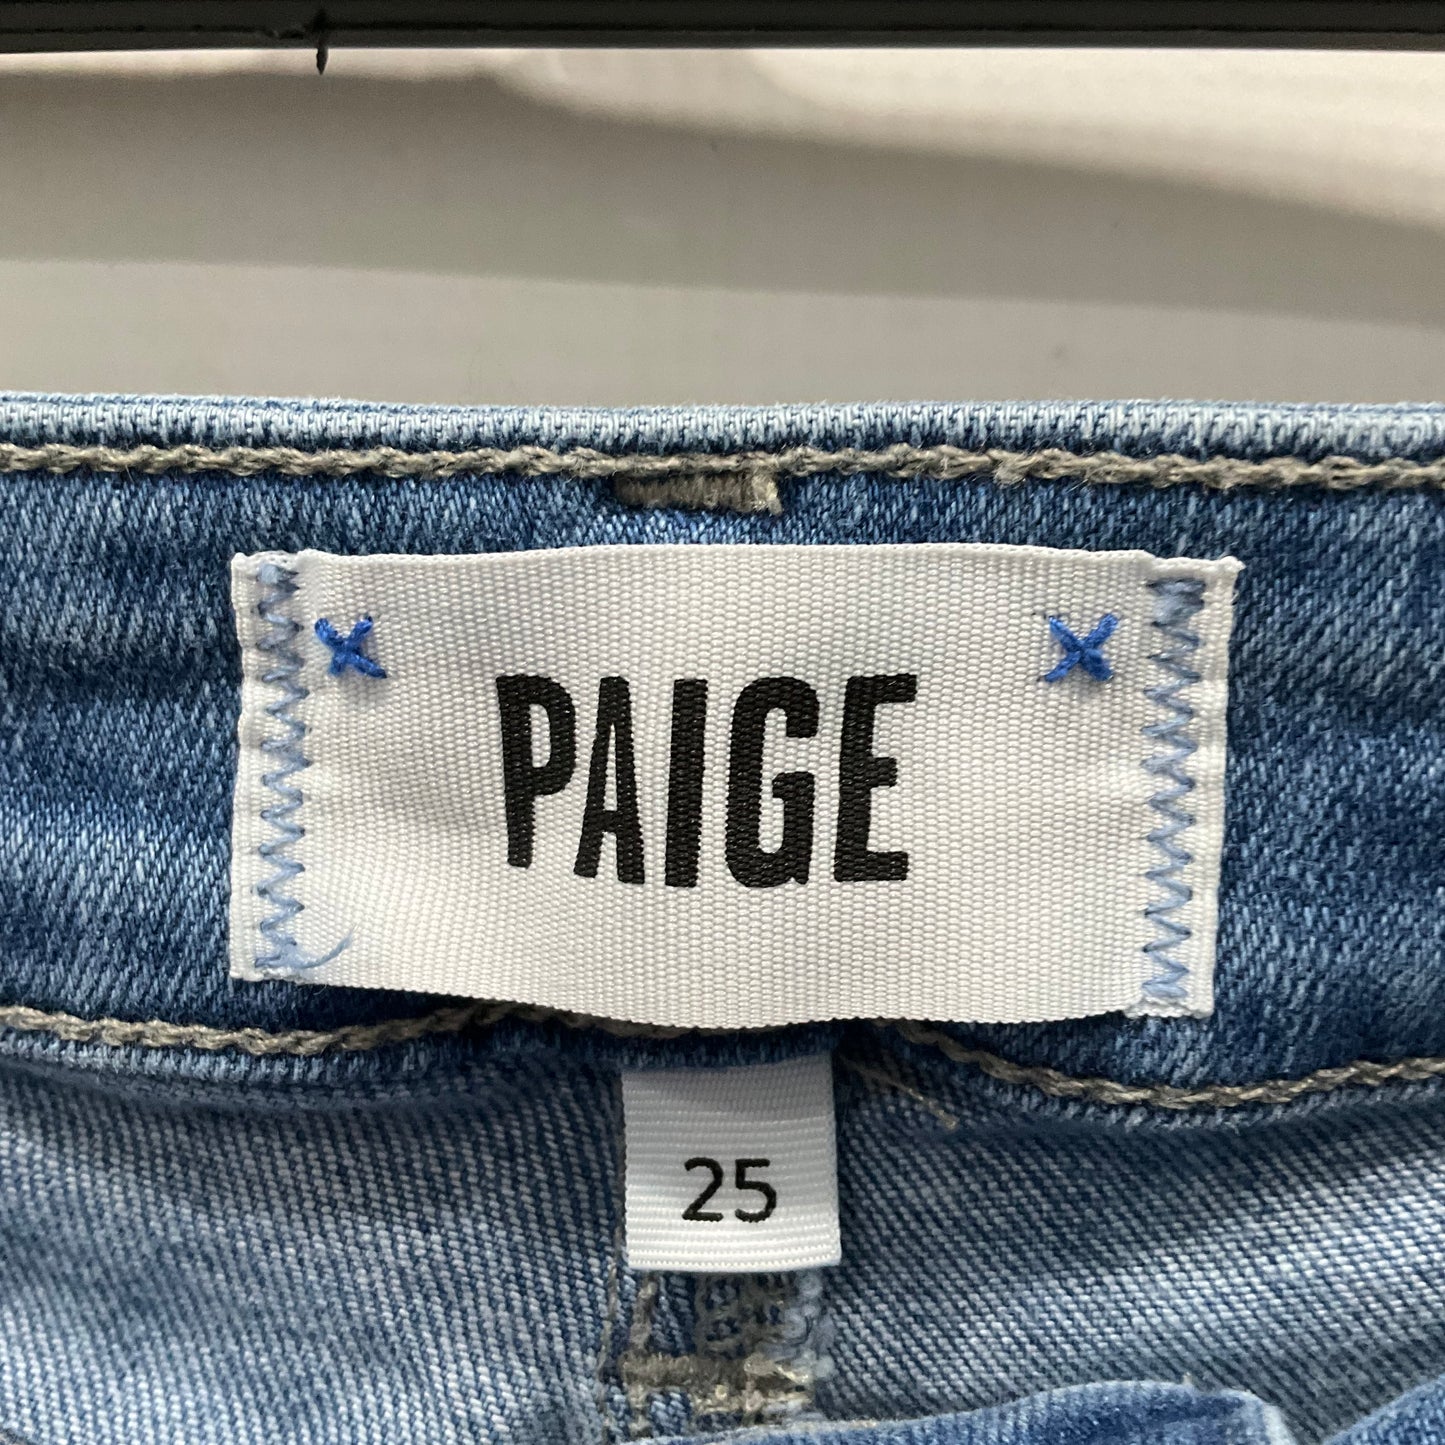 Jeans Boot Cut By Paige  Size: 2